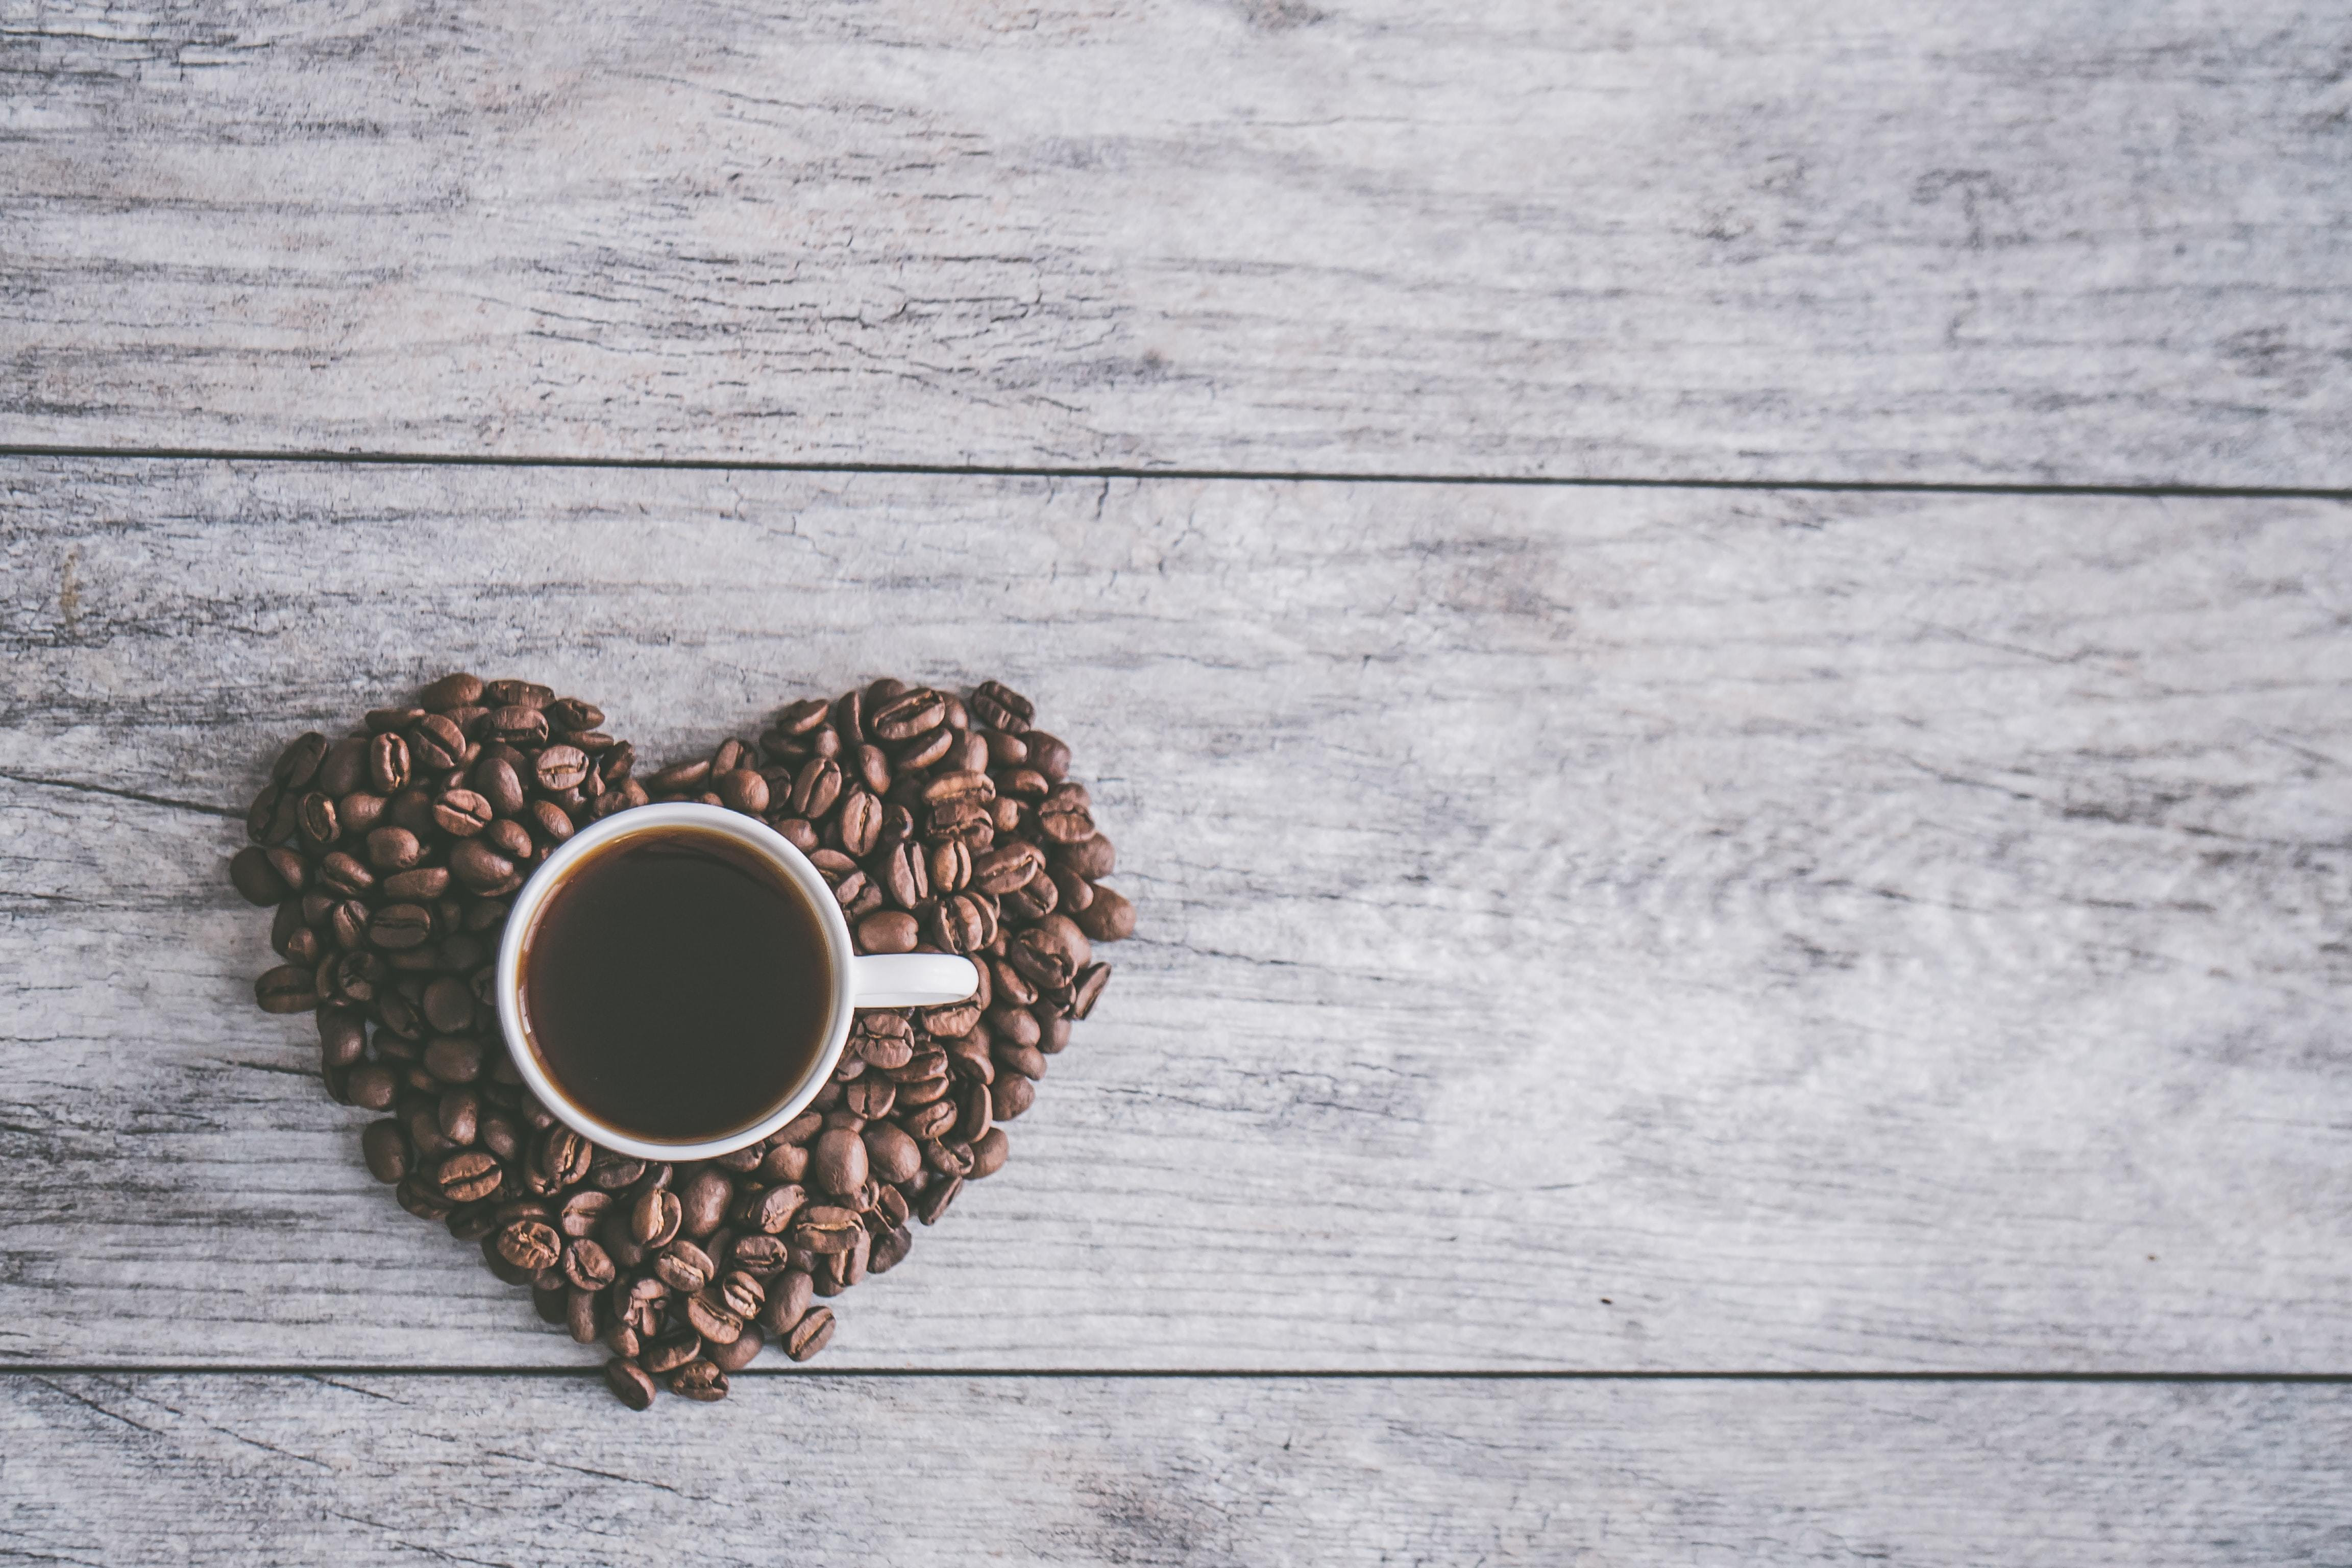 Birds eye photo of a cup of coffee on top of a heart made of coffee beans, on a wooden table.